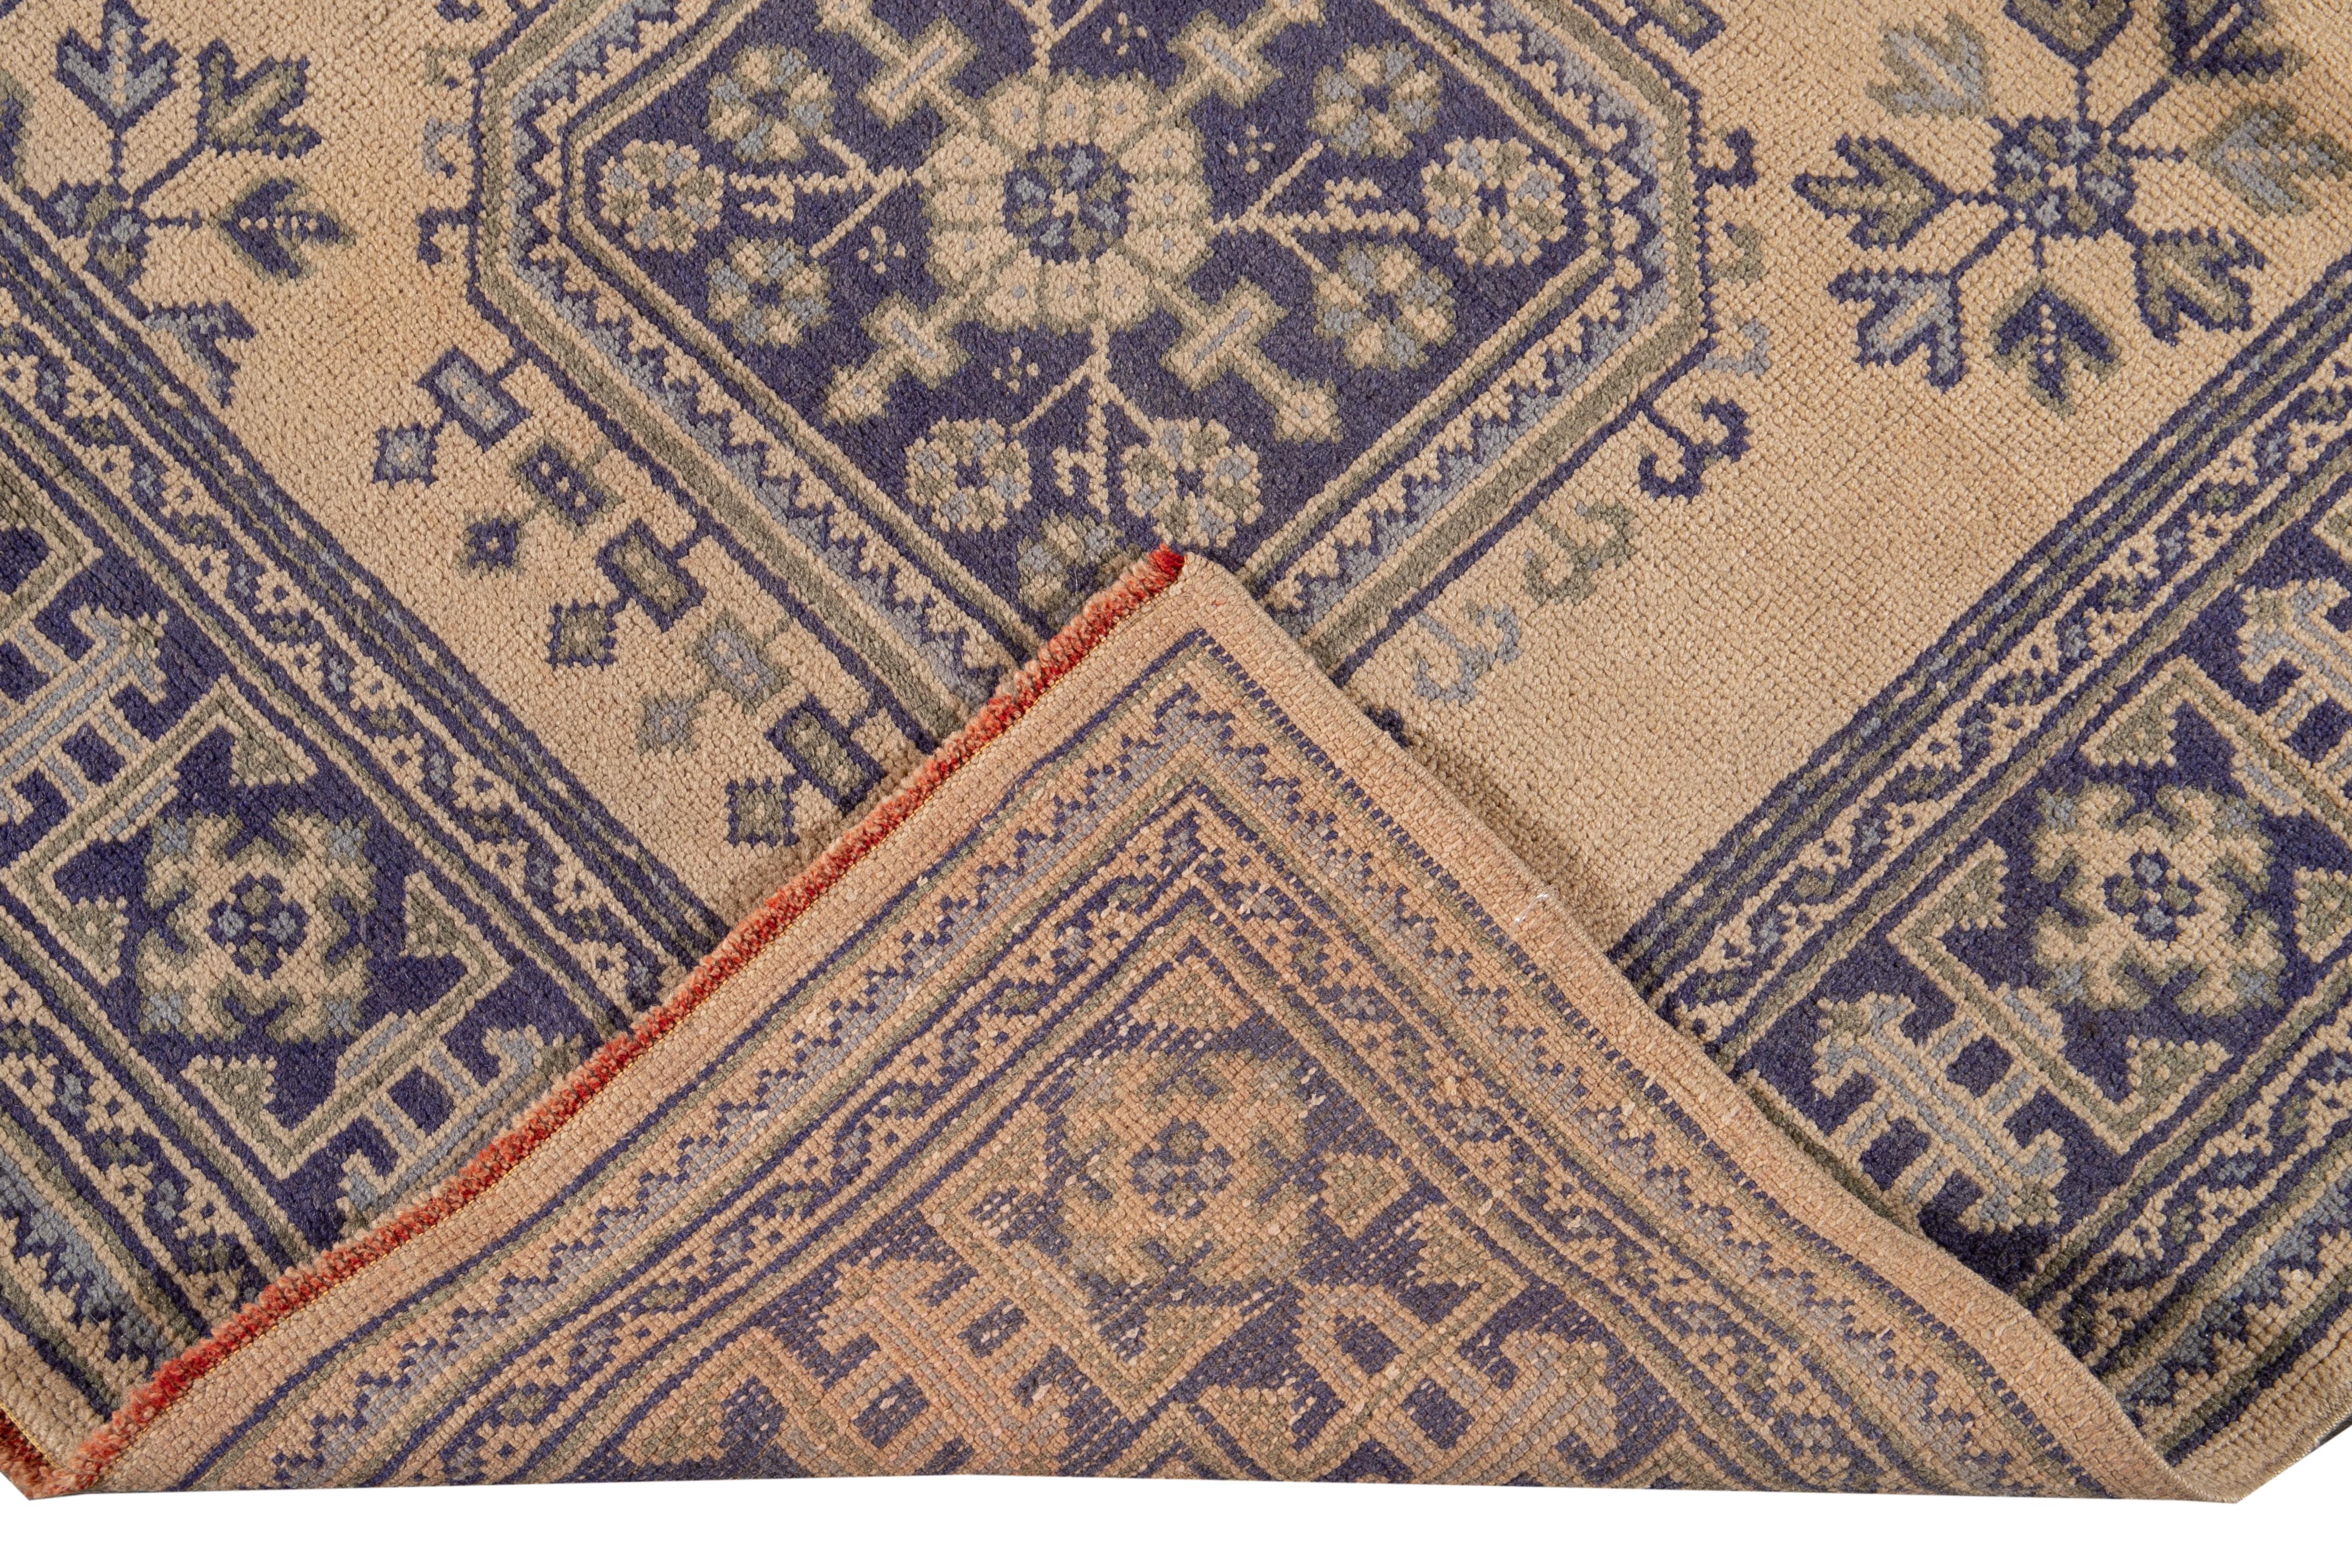 Beautiful vintage Turkish hand-knotted wool rug with a tan field. This rug has a blue border and green accents in a gorgeous all-over geometric tribal design.

This rug measures: 4'5